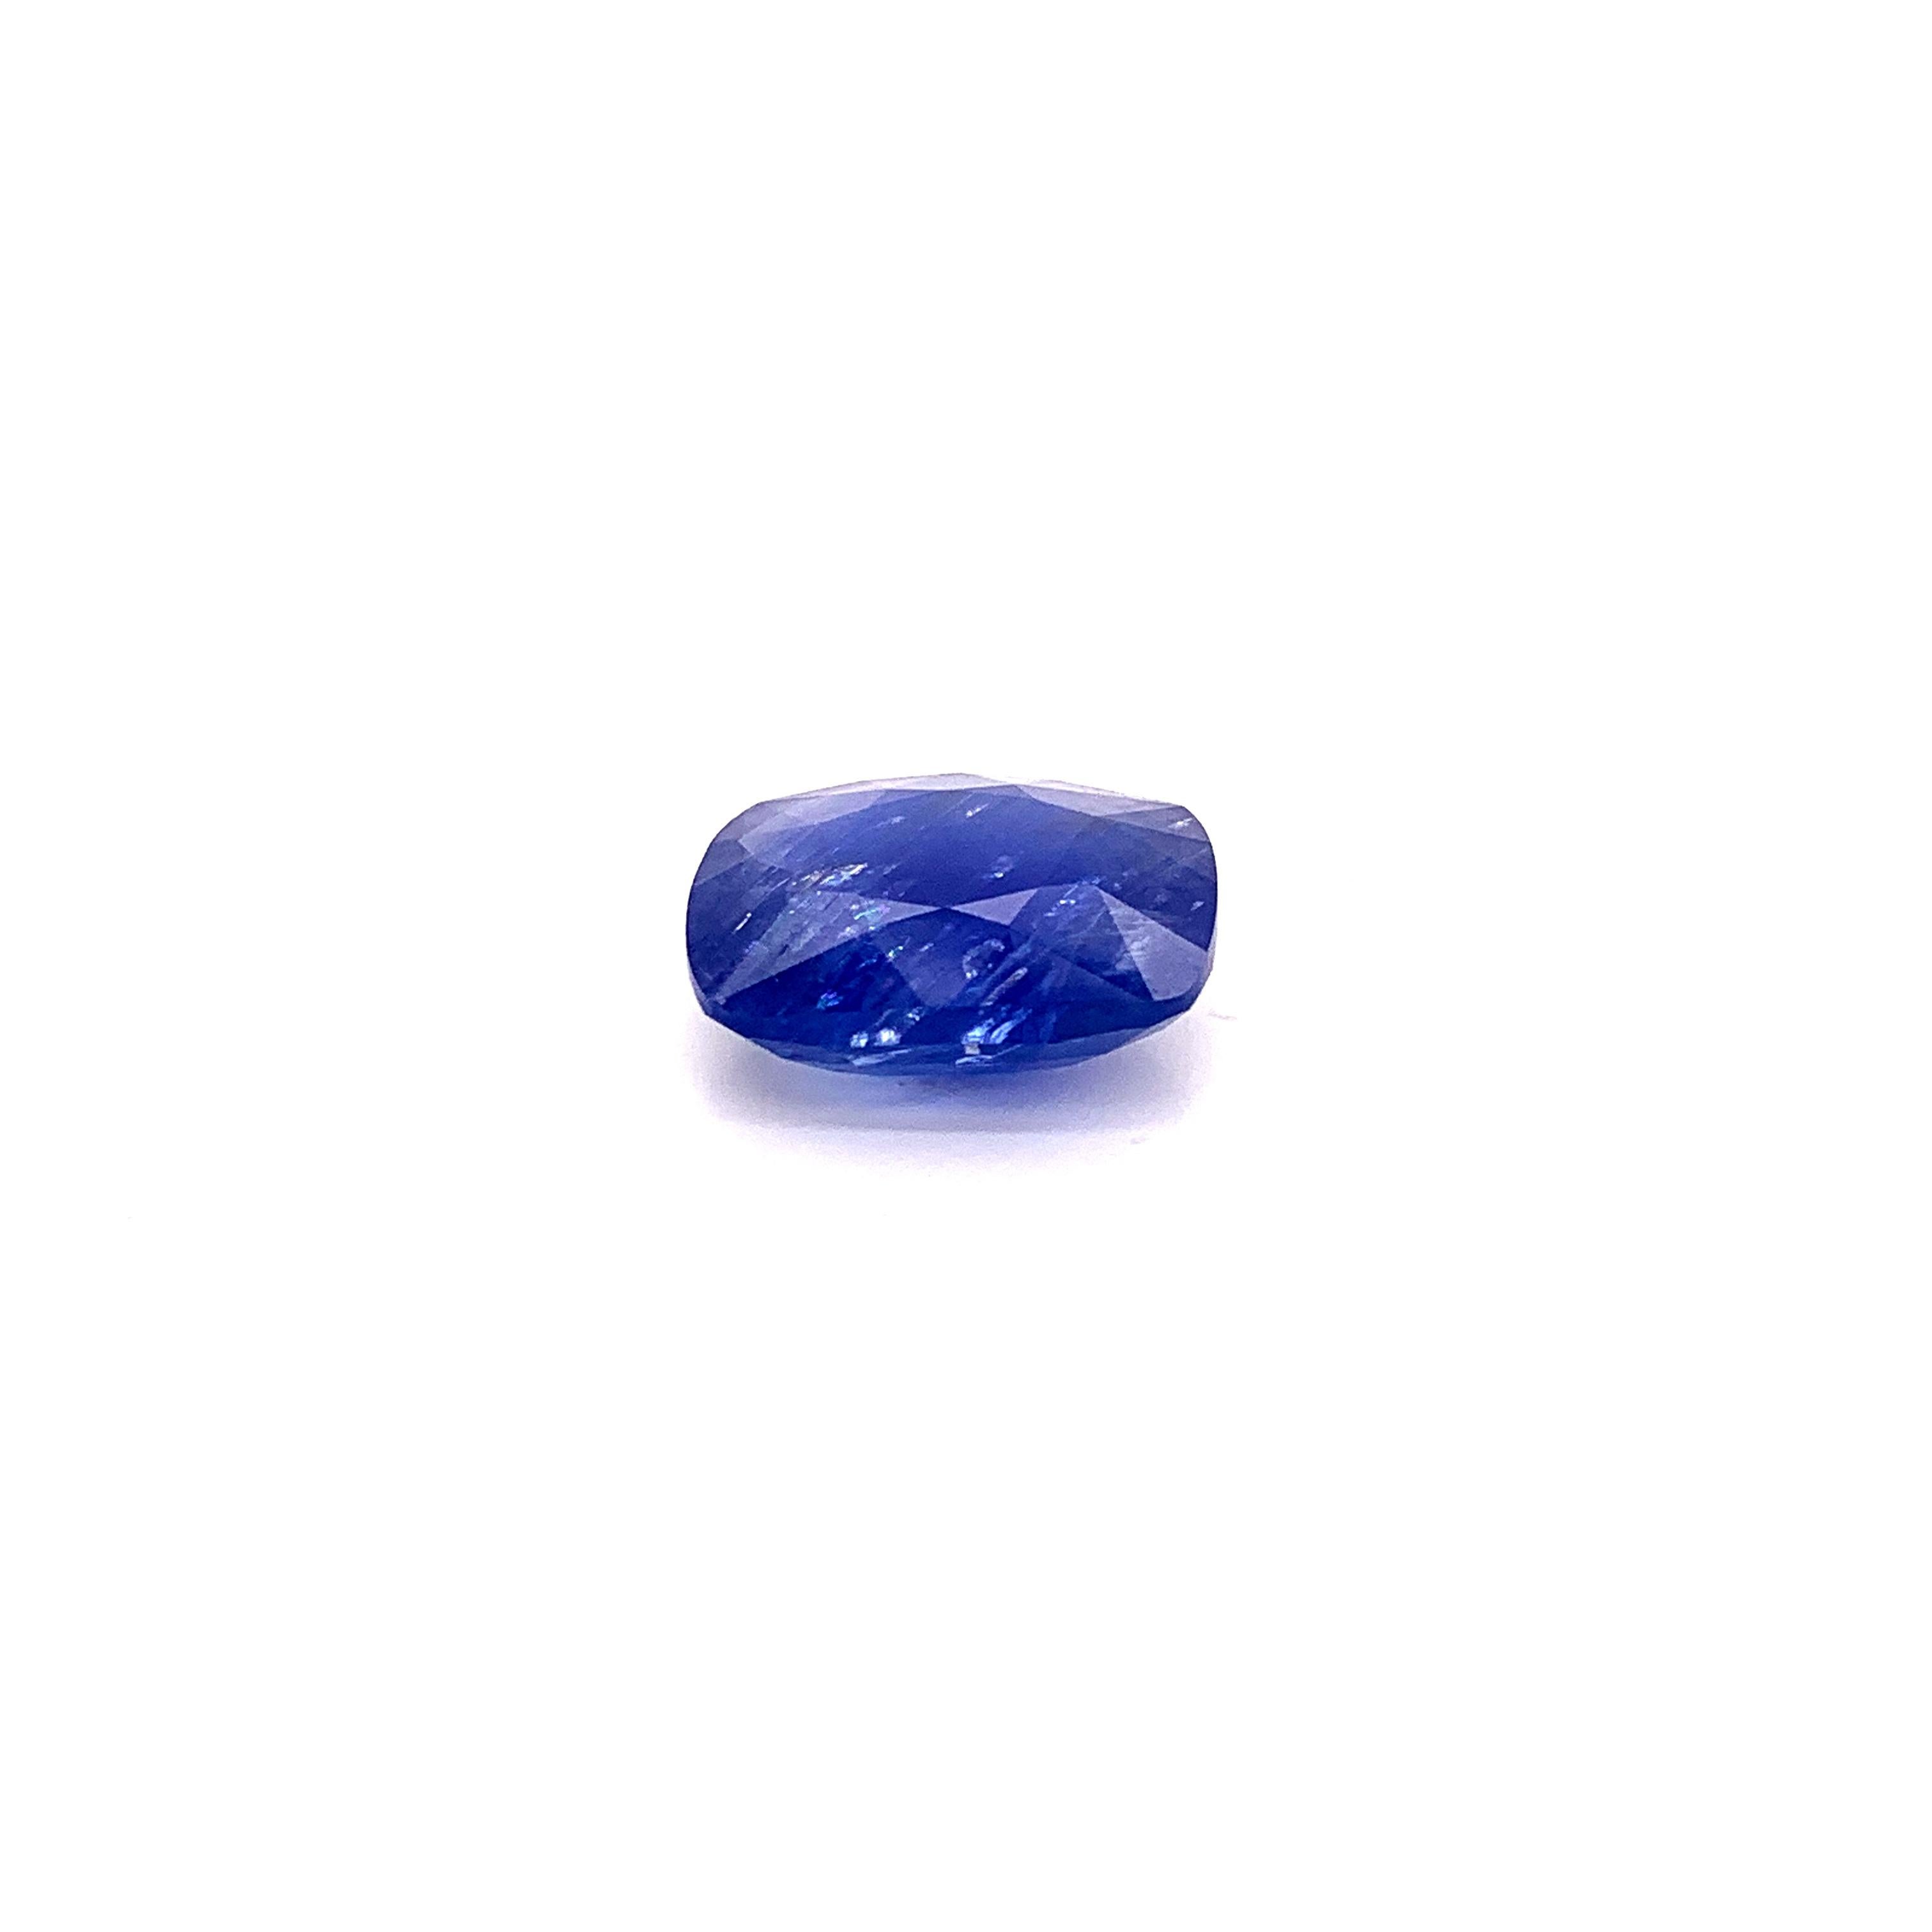 19.86 Carat Cushion-Shaped Burmese Unheated Natural Blue Sapphire:

A beautiful stone, it is a cushion-shaped natural unheated Burmese blue sapphire weighing a total of 19.86 carat. The sapphire, hailing from Burma and without any treatment, has a